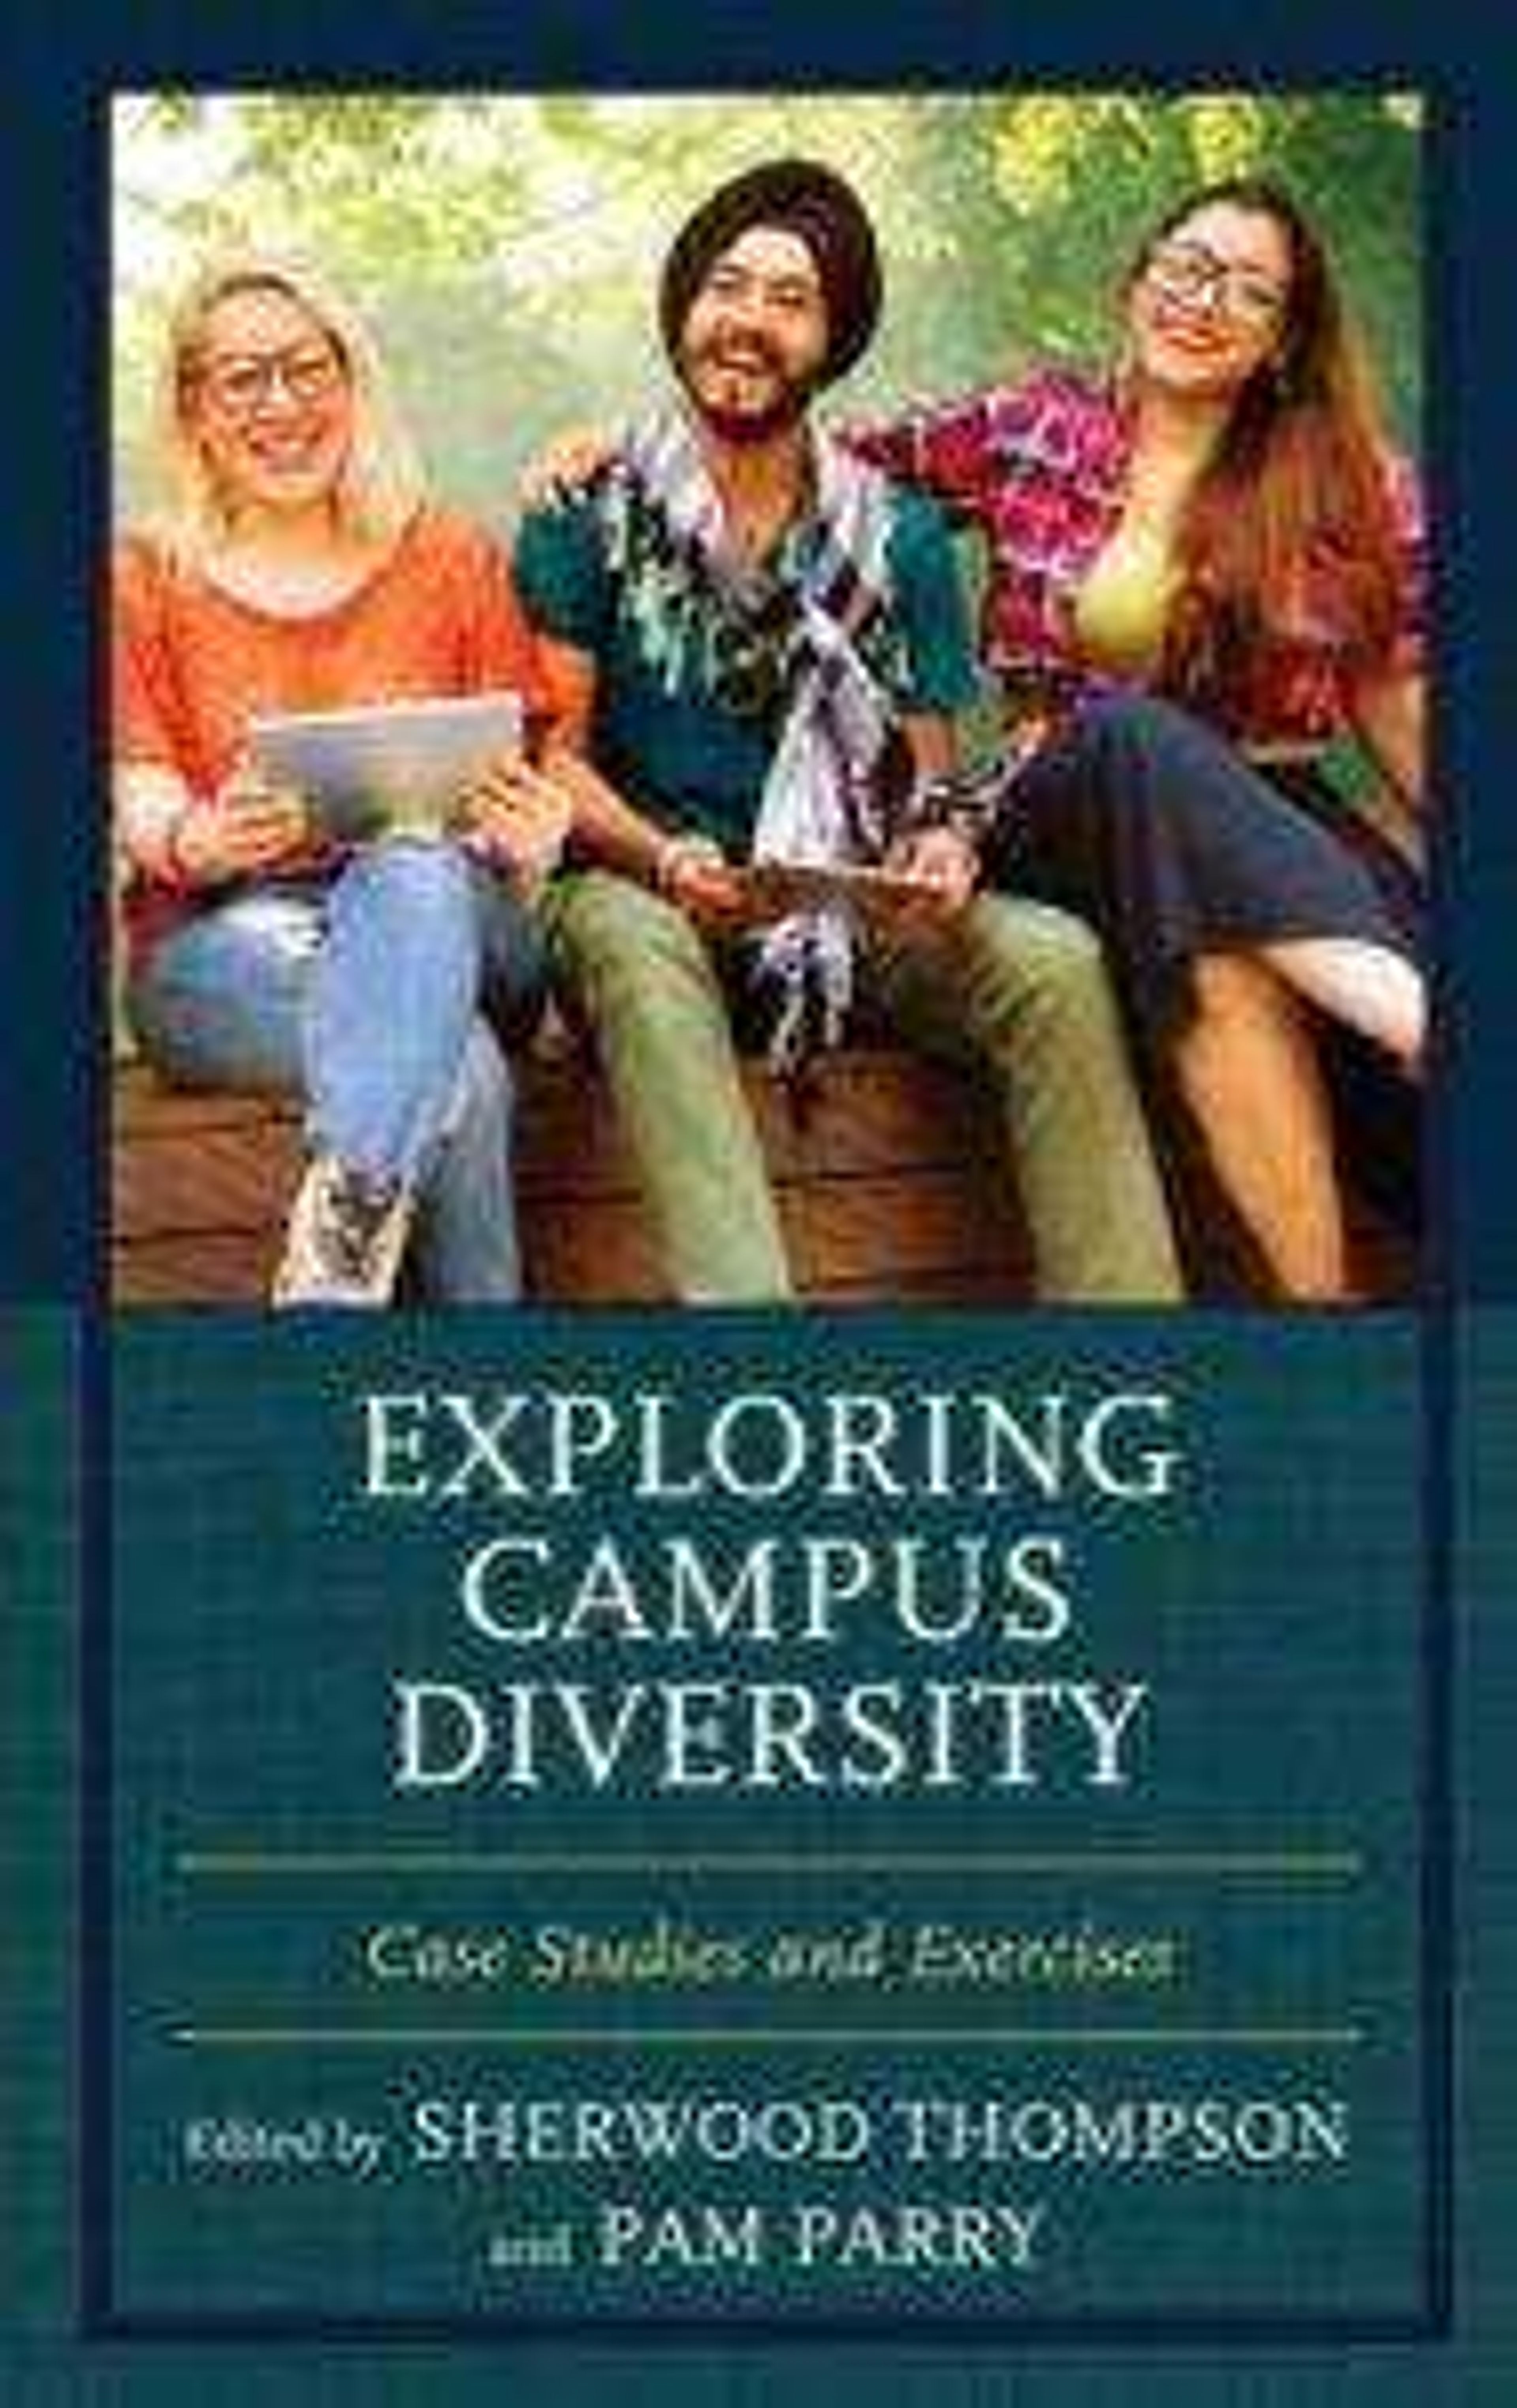 “Exploring Campus Diversity: Case Studies and Exercises” will be available Nov. 15. It can be purchased on Amazon or through Rowman & Littlefield Publishers.